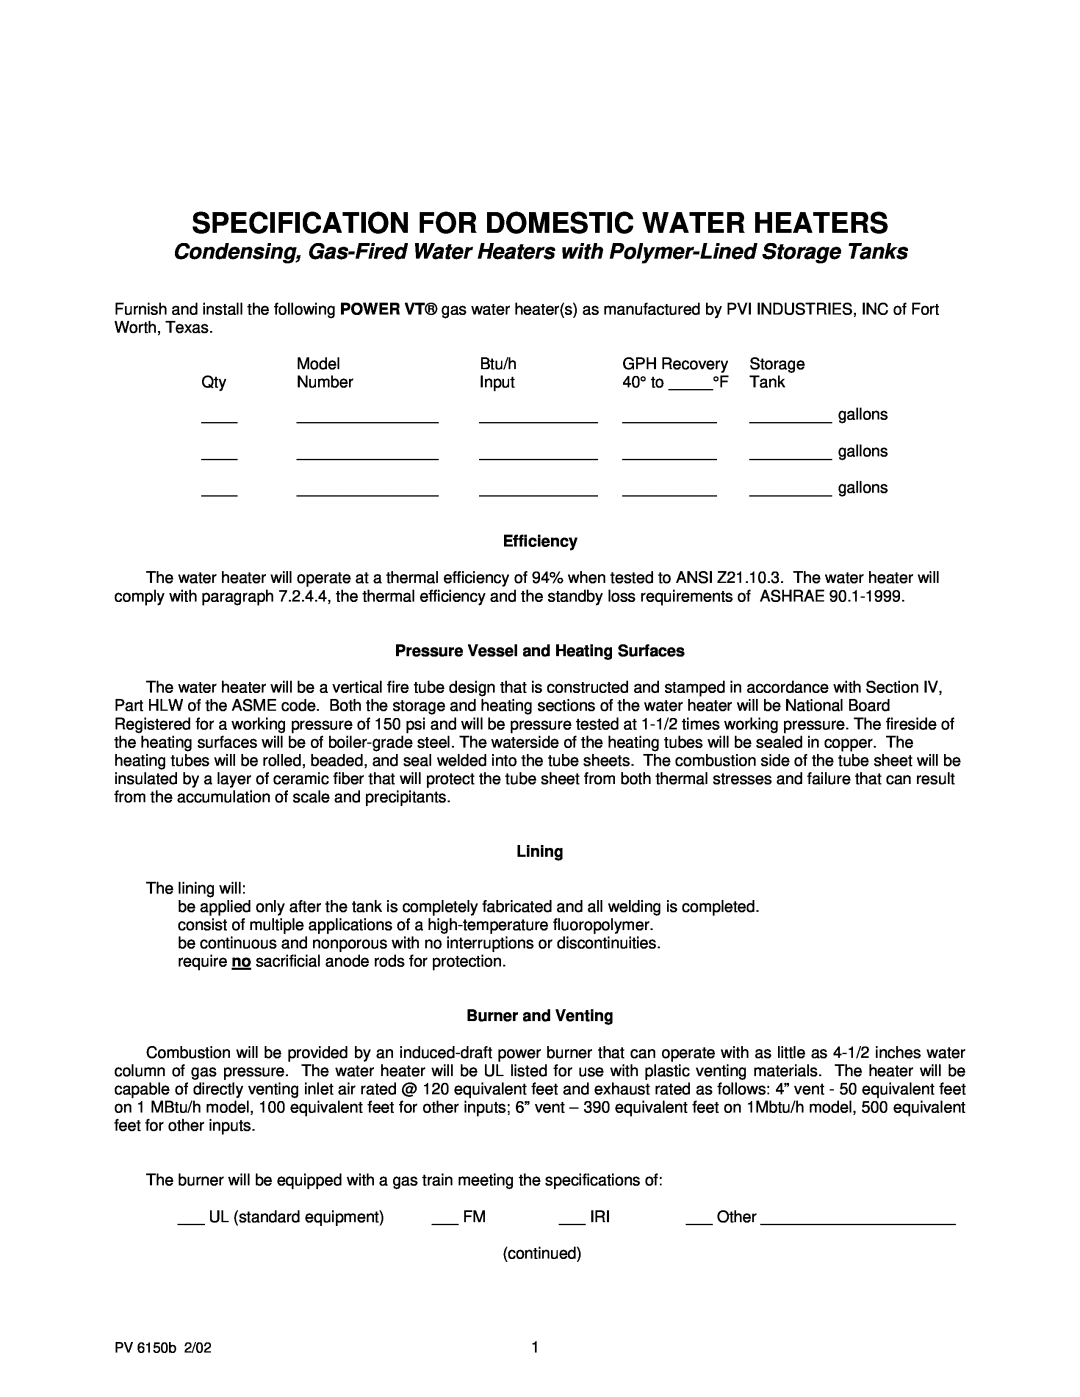 PVI Industries PV 6150b specifications Specification For Domestic Water Heaters, Efficiency, Lining, Burner and Venting 